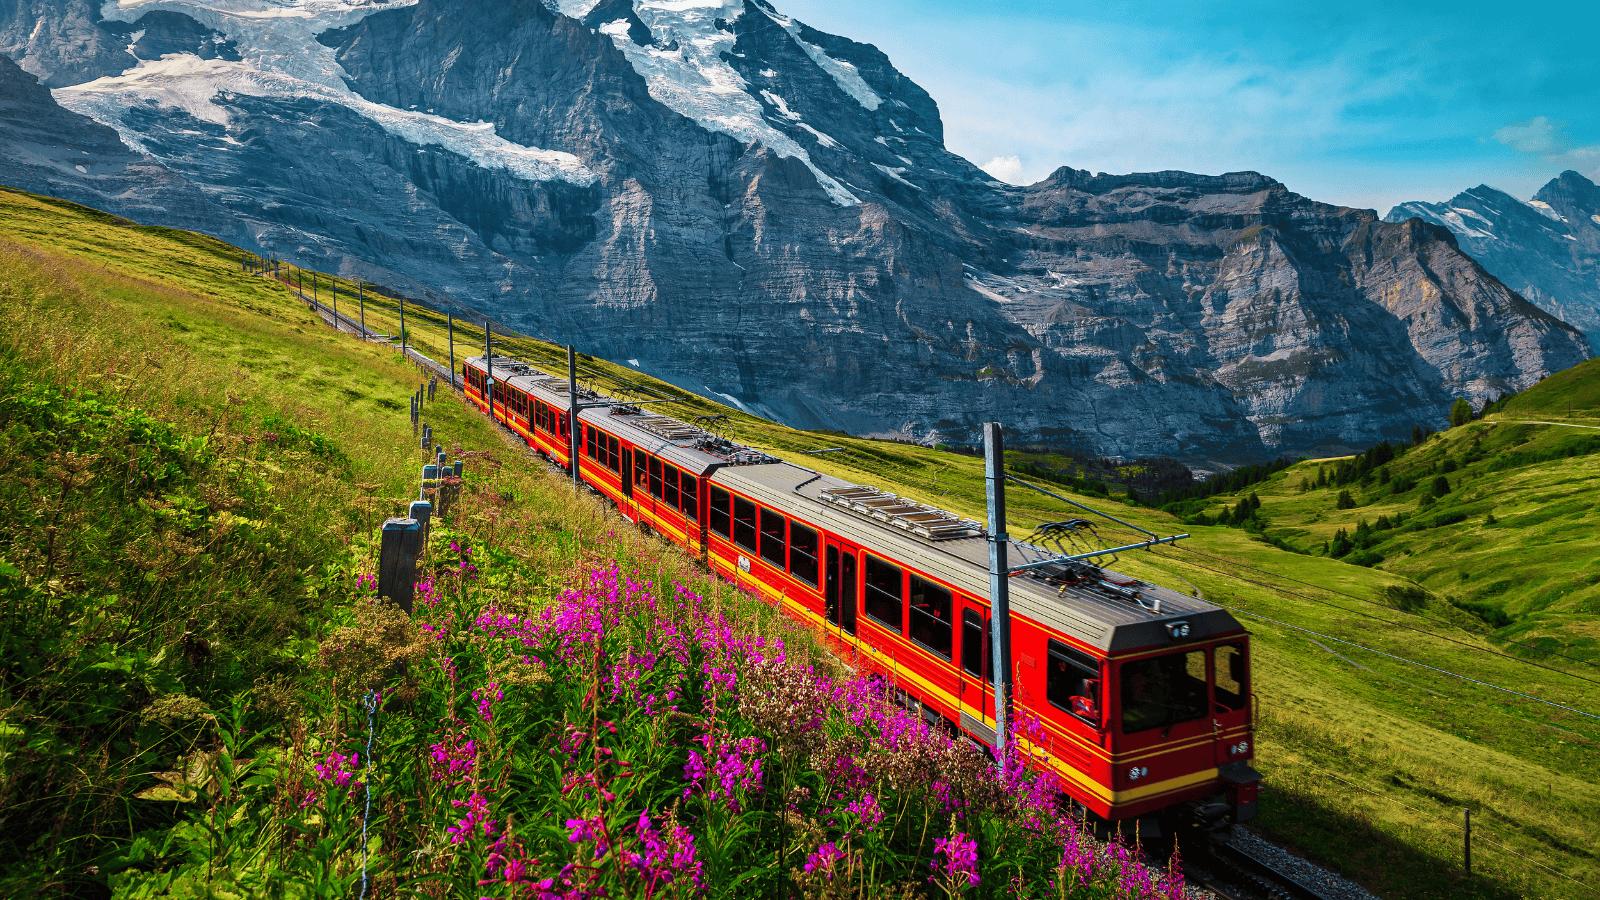 <p>All aboard these scenic rail tours of the world’s most diverse and striking landscapes.</p> <p>Railroads are a nostalgic travel method offering unique perspectives on epic worldwide destinations. From cross-country voyages to one-day excursions, train tours are an efficient and memorable way to explore new locales. </p> <p>Embark on the journey of a lifetime with these picture-perfect train routes around the world. </p>